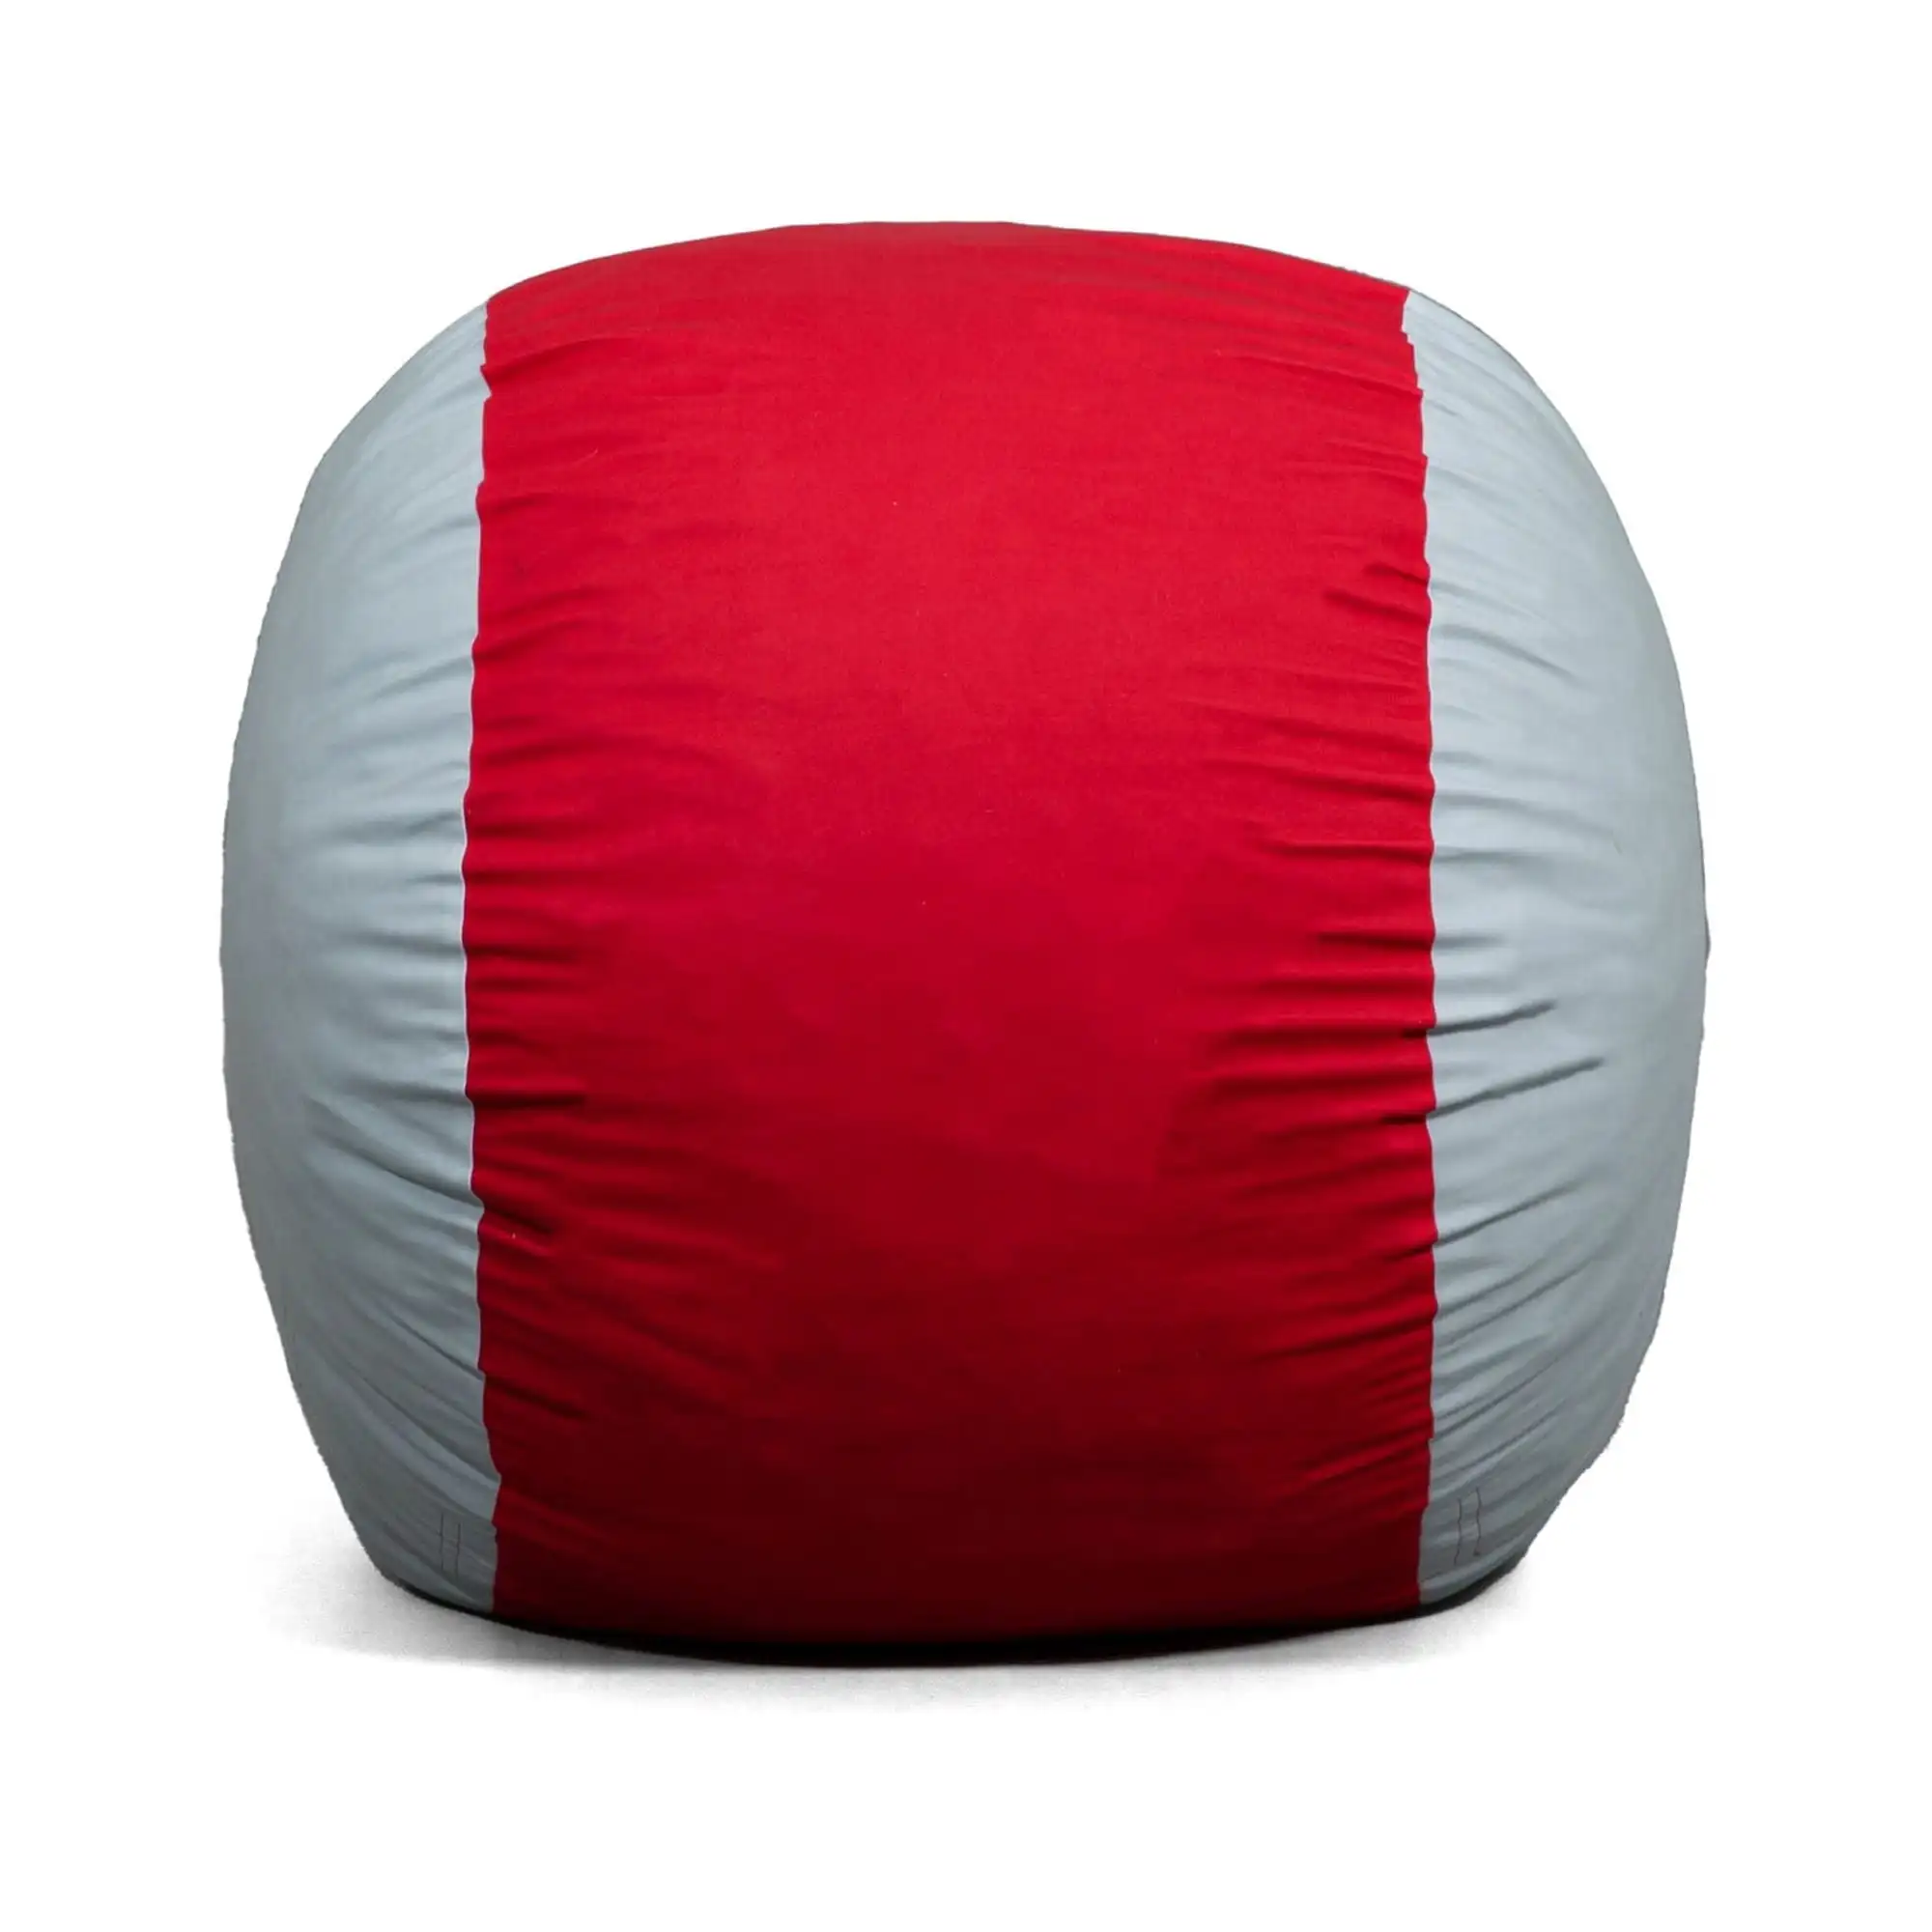 

Medium Foam Filled Bean Bag Chair for Adults/Kids Lazy Floor Sofa Couch w/ Woven Polyester Removable Cover- 3 Foot, Scarlet/Grey